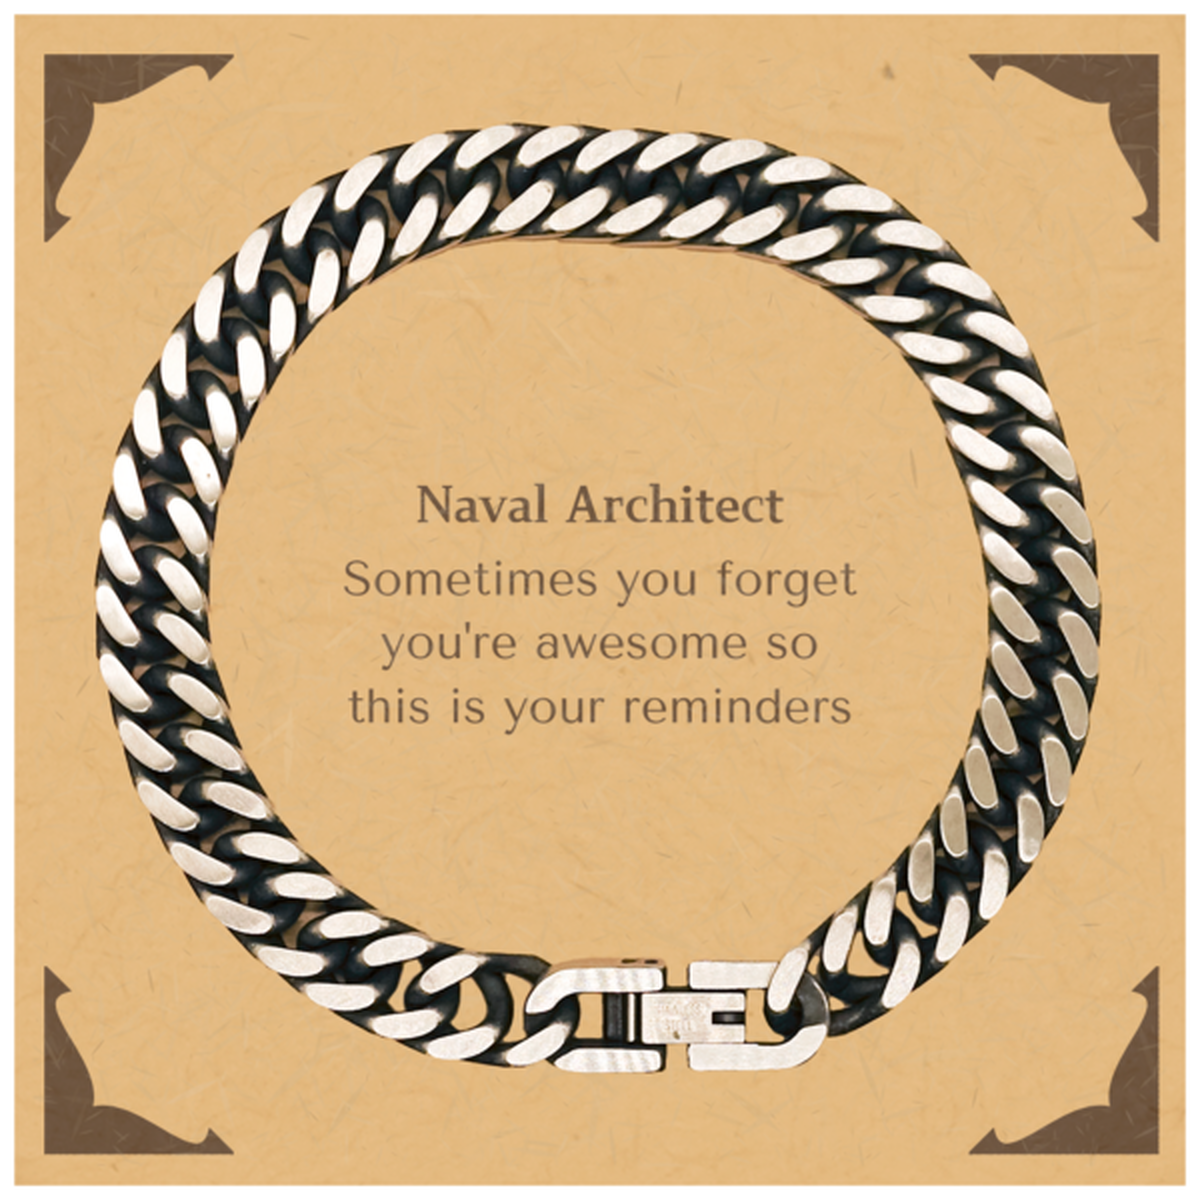 Sentimental Naval Architect Cuban Link Chain Bracelet, Naval Architect Sometimes you forget you're awesome so this is your reminders, Graduation Christmas Birthday Gifts for Naval Architect, Men, Women, Coworkers